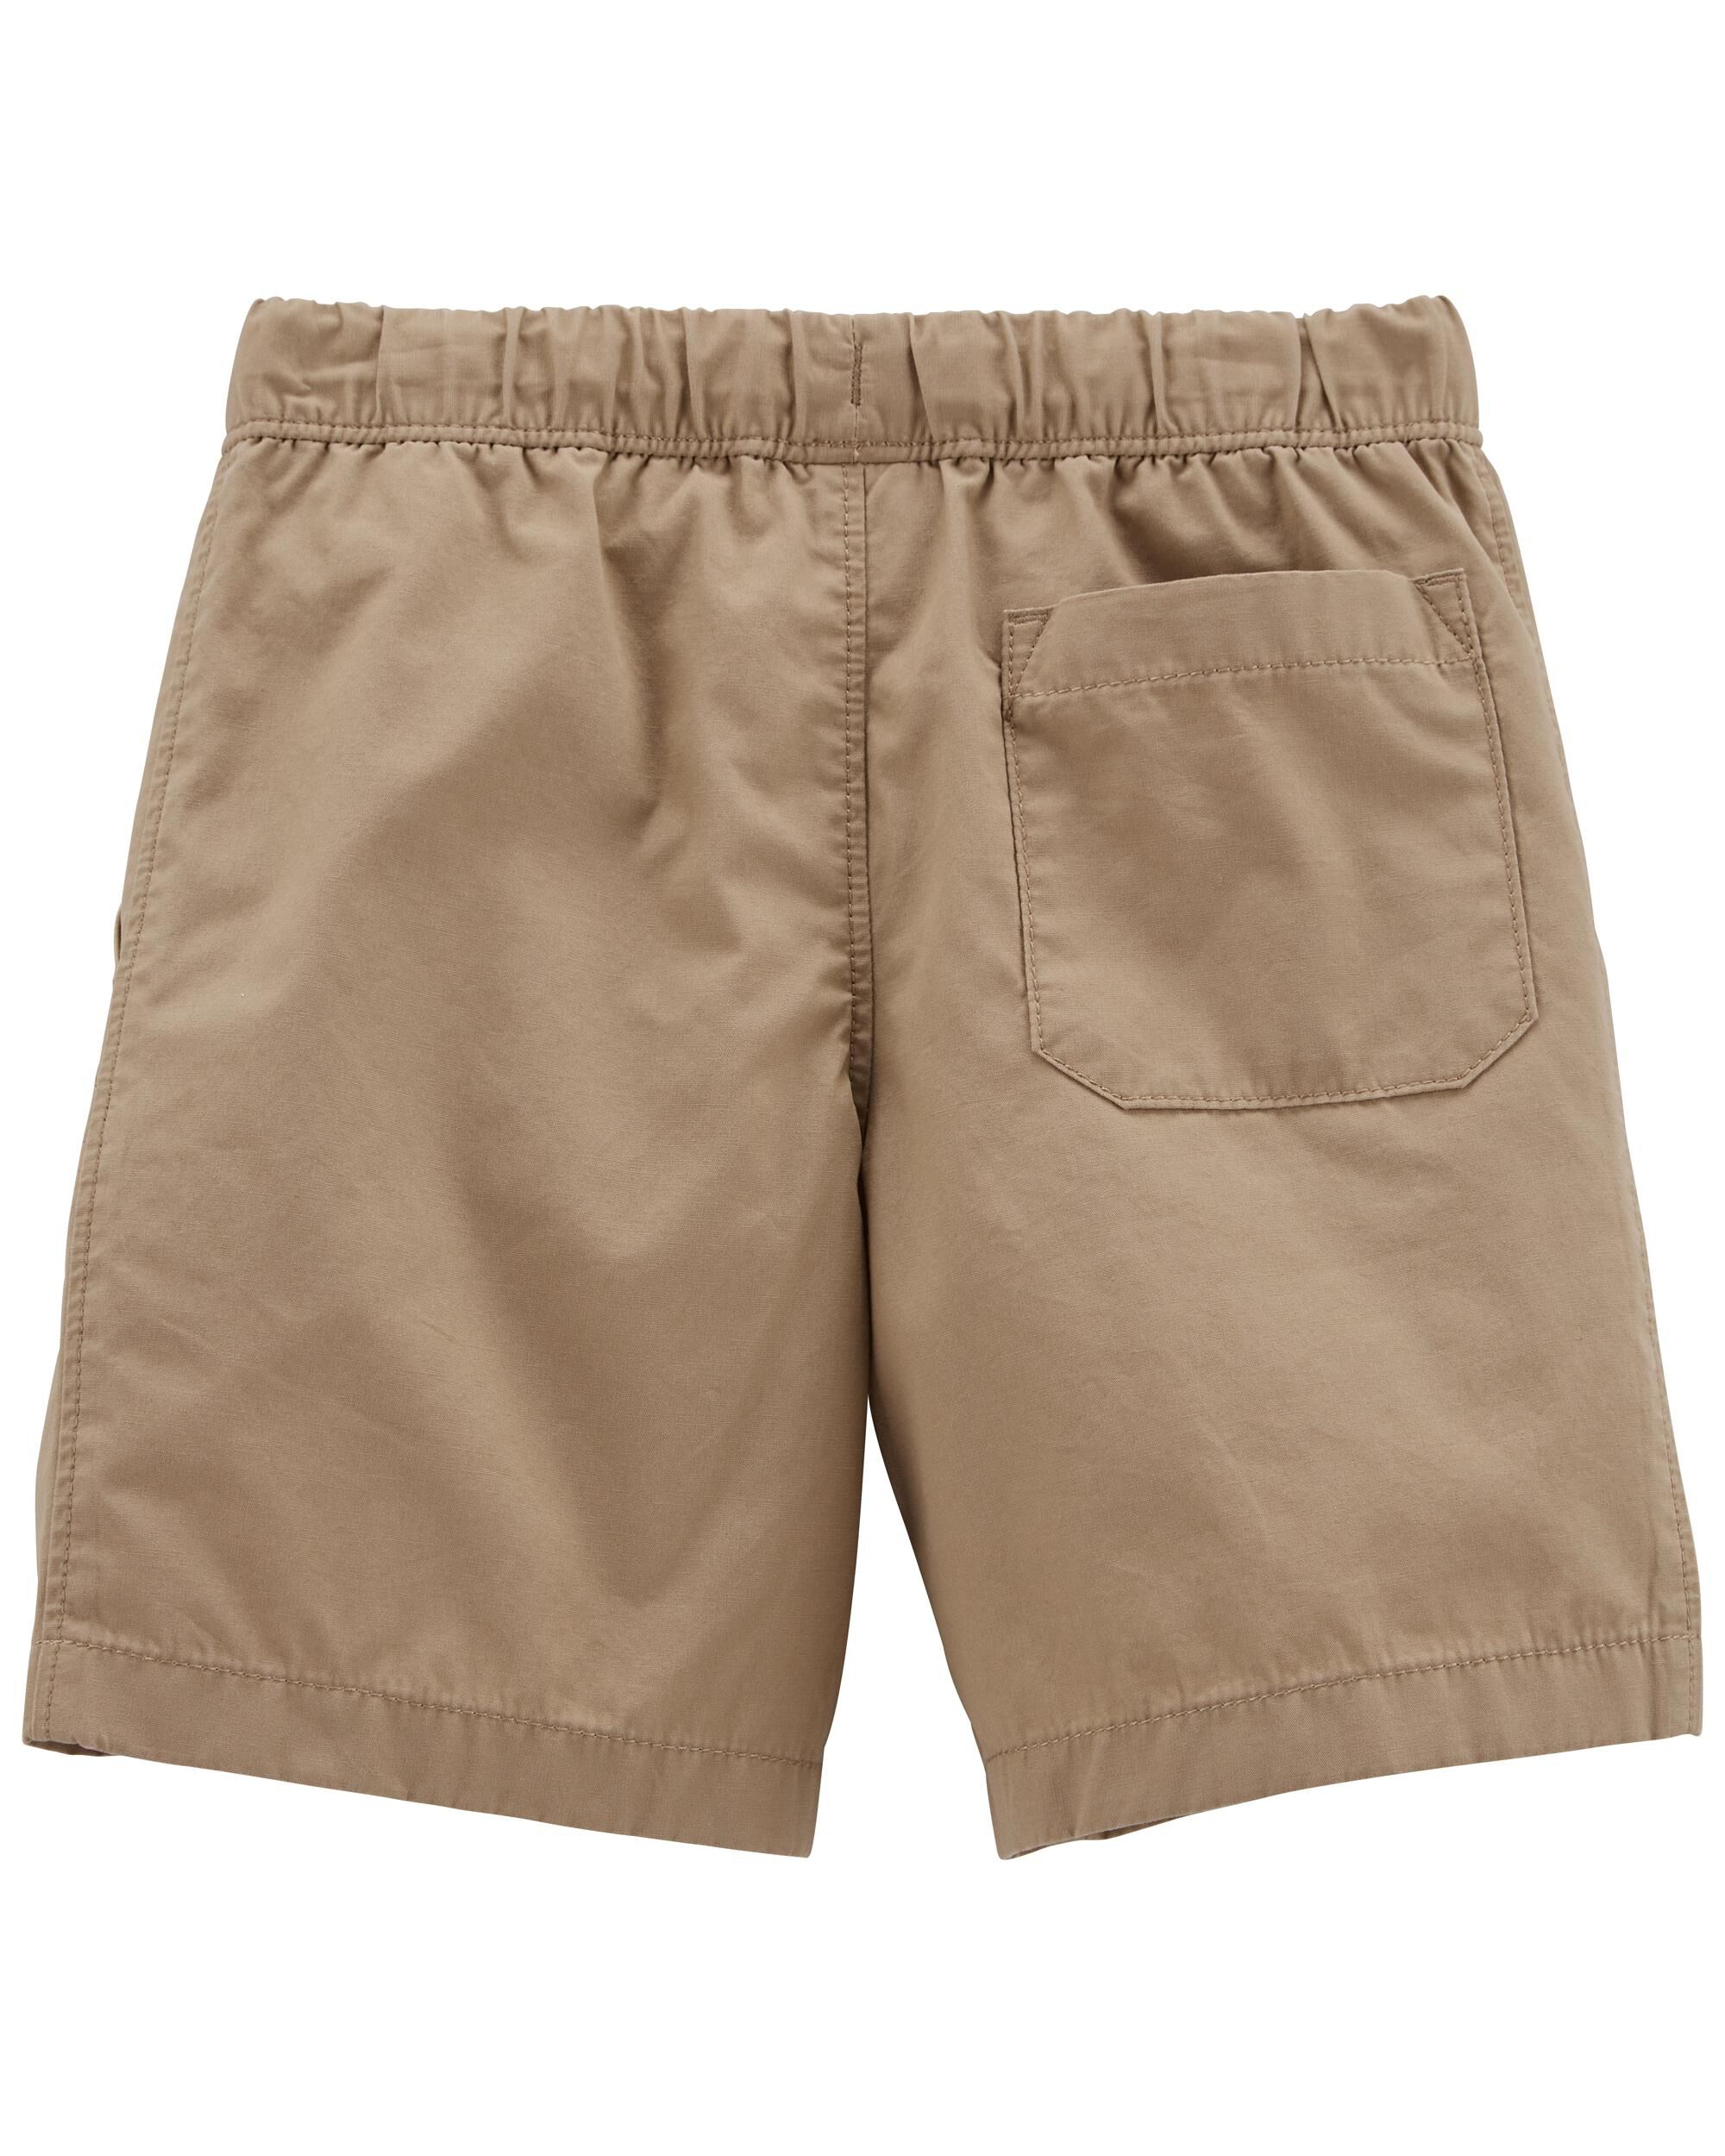 Details about   NEW Boys Carter's Pull On Shorts Kids size 5 